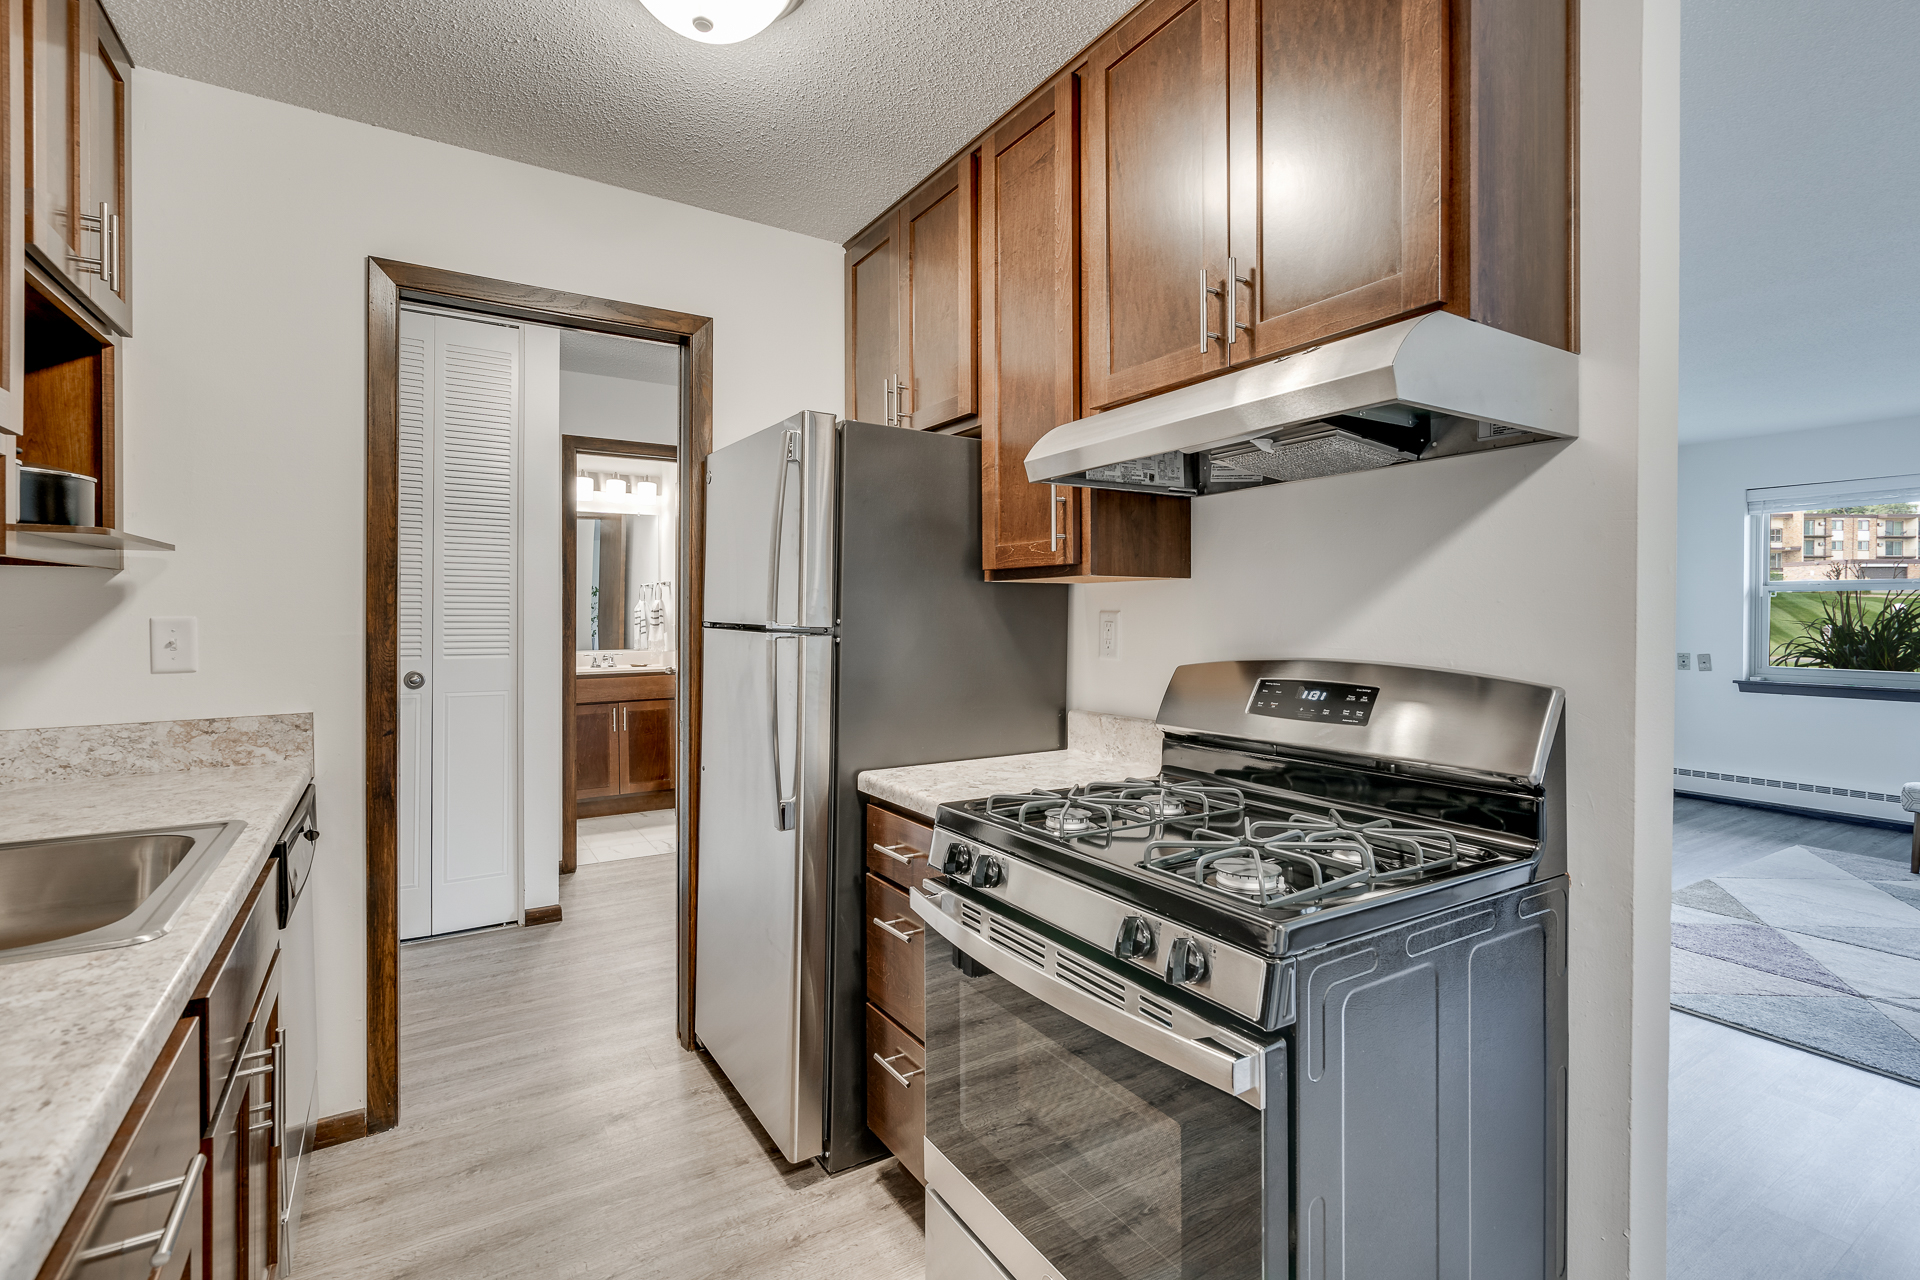 Stainless Steel Appliances In Kitchens At Sumter Green Apartments In Crystal, MN